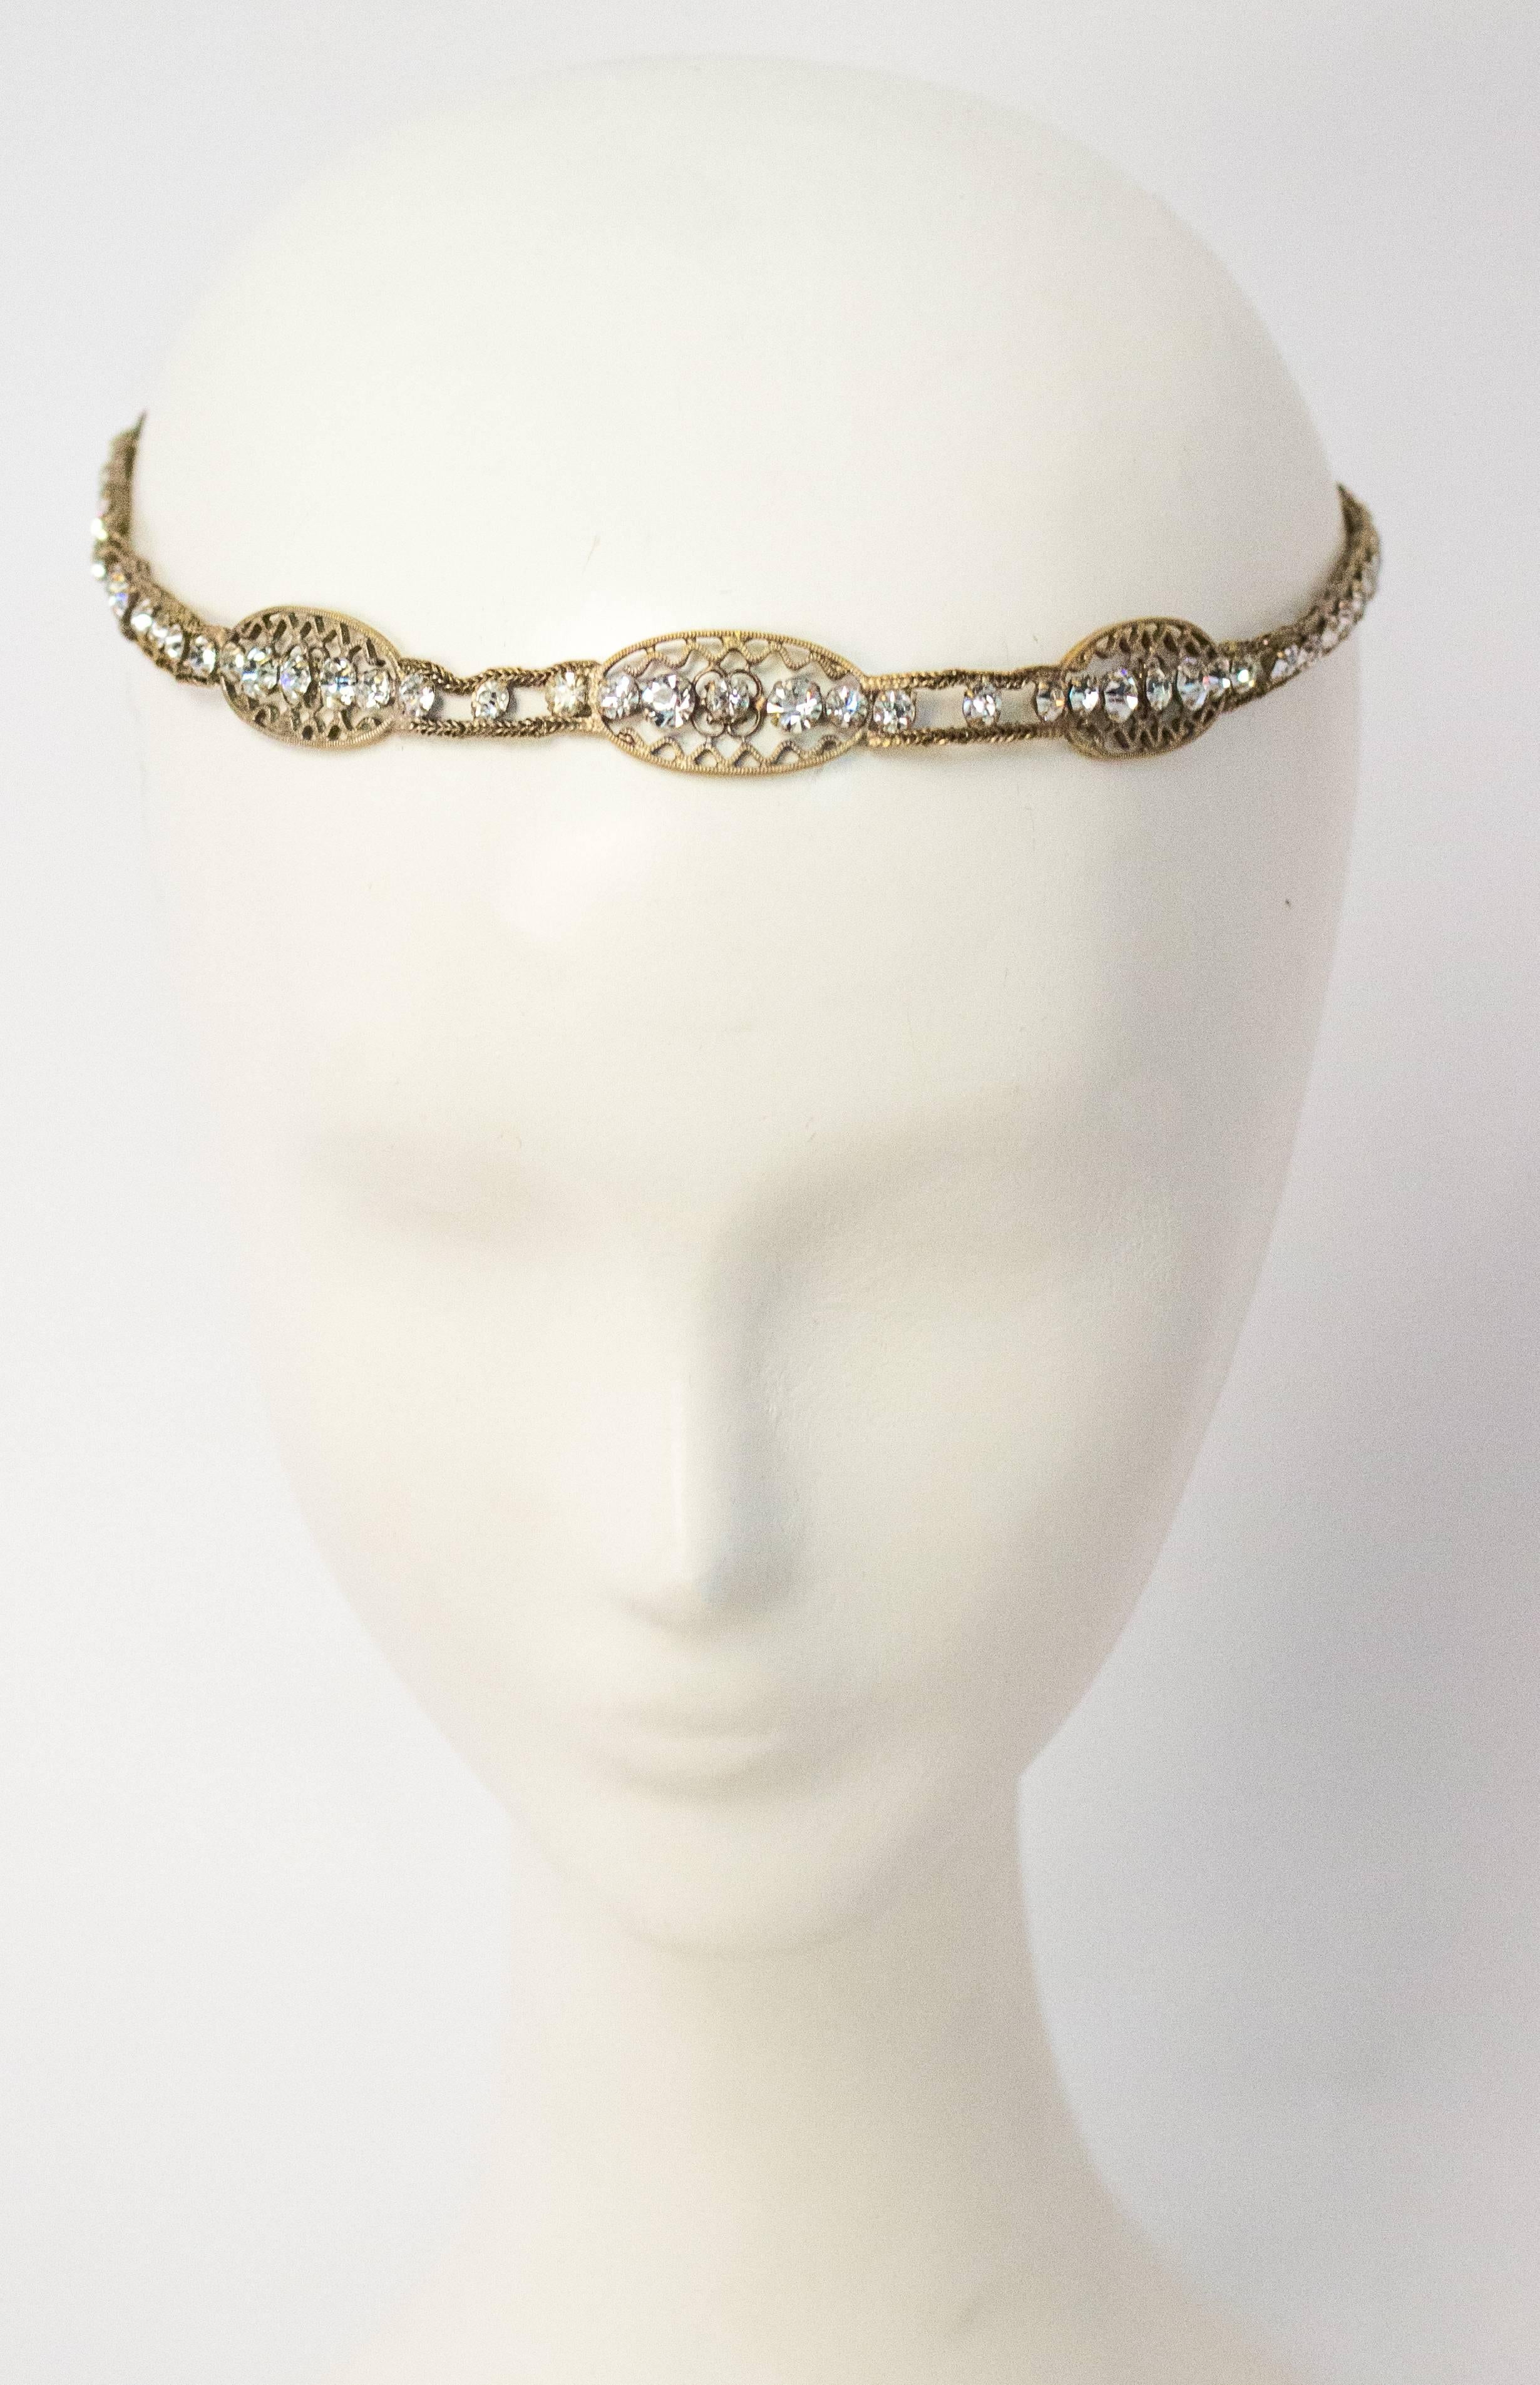 20s Crystal and Brass Filigree Headband. Braided ribbon allows for an adjustable fit.